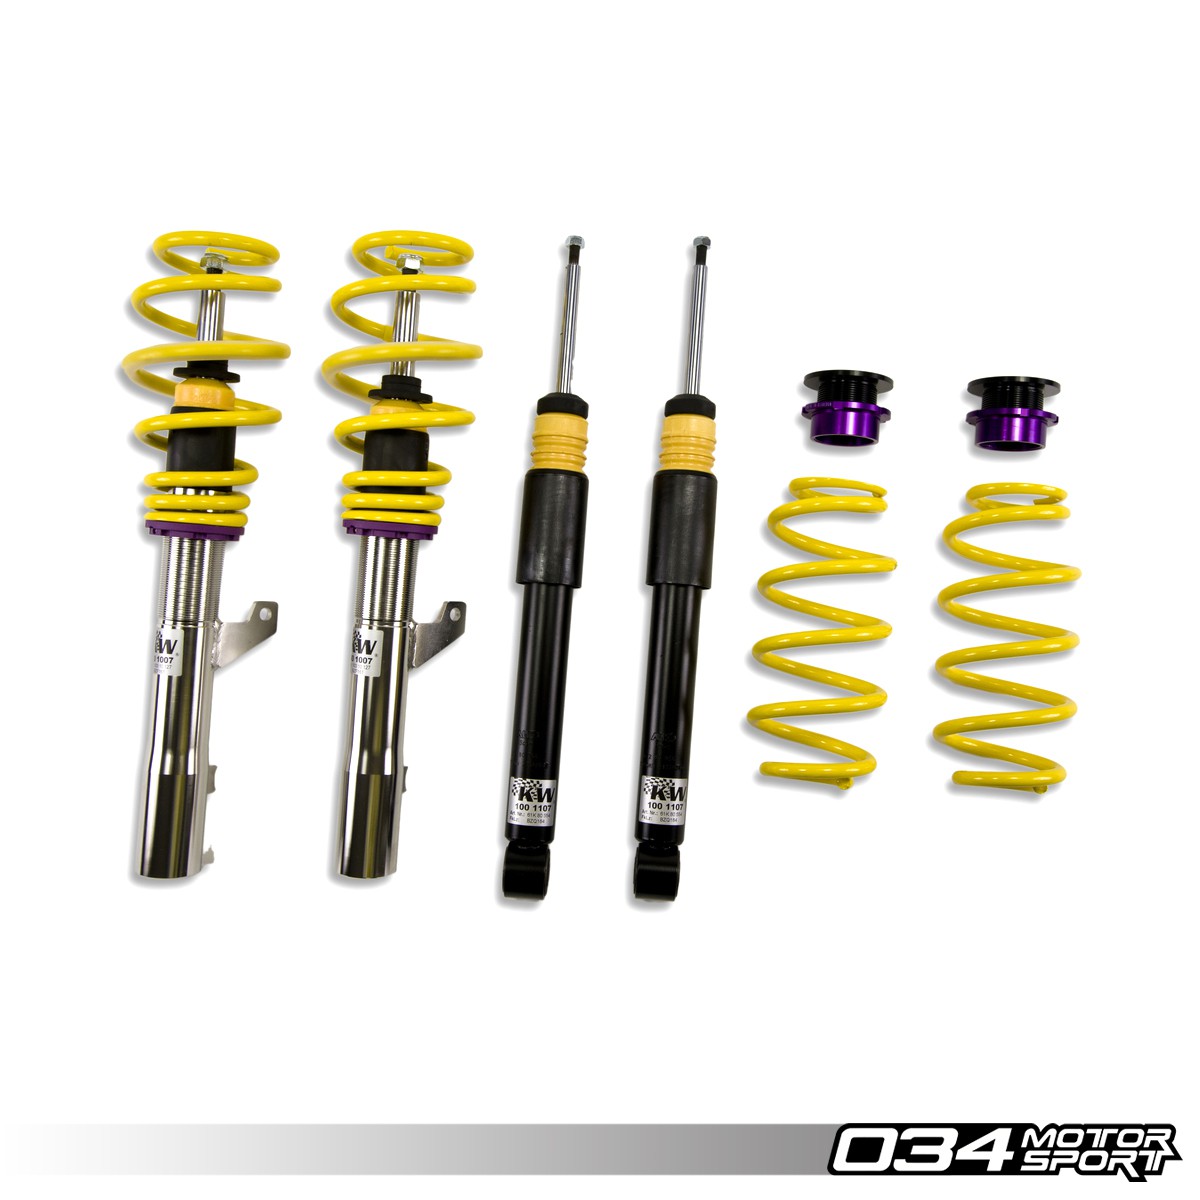 KW Variant 3 Coilover Suspension, Audi R8 V10 5.2L FSI With Magnetic Ride | KW-35211005